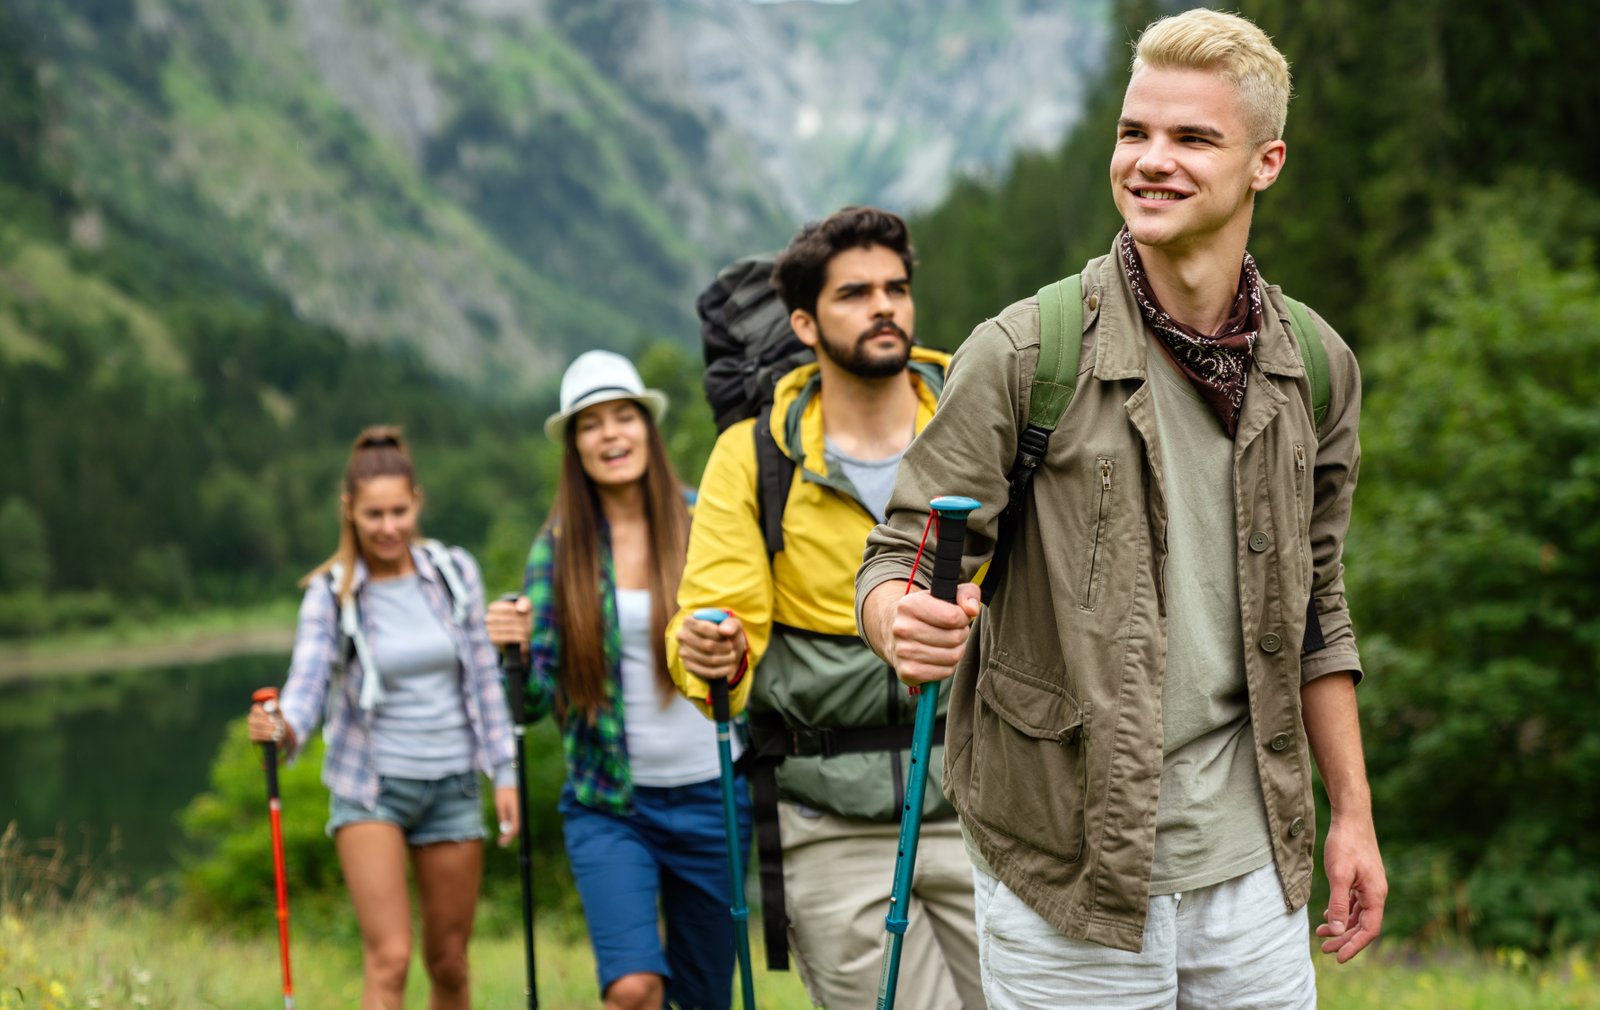 Group of friends with backpacks doing trekking excursion on mountain